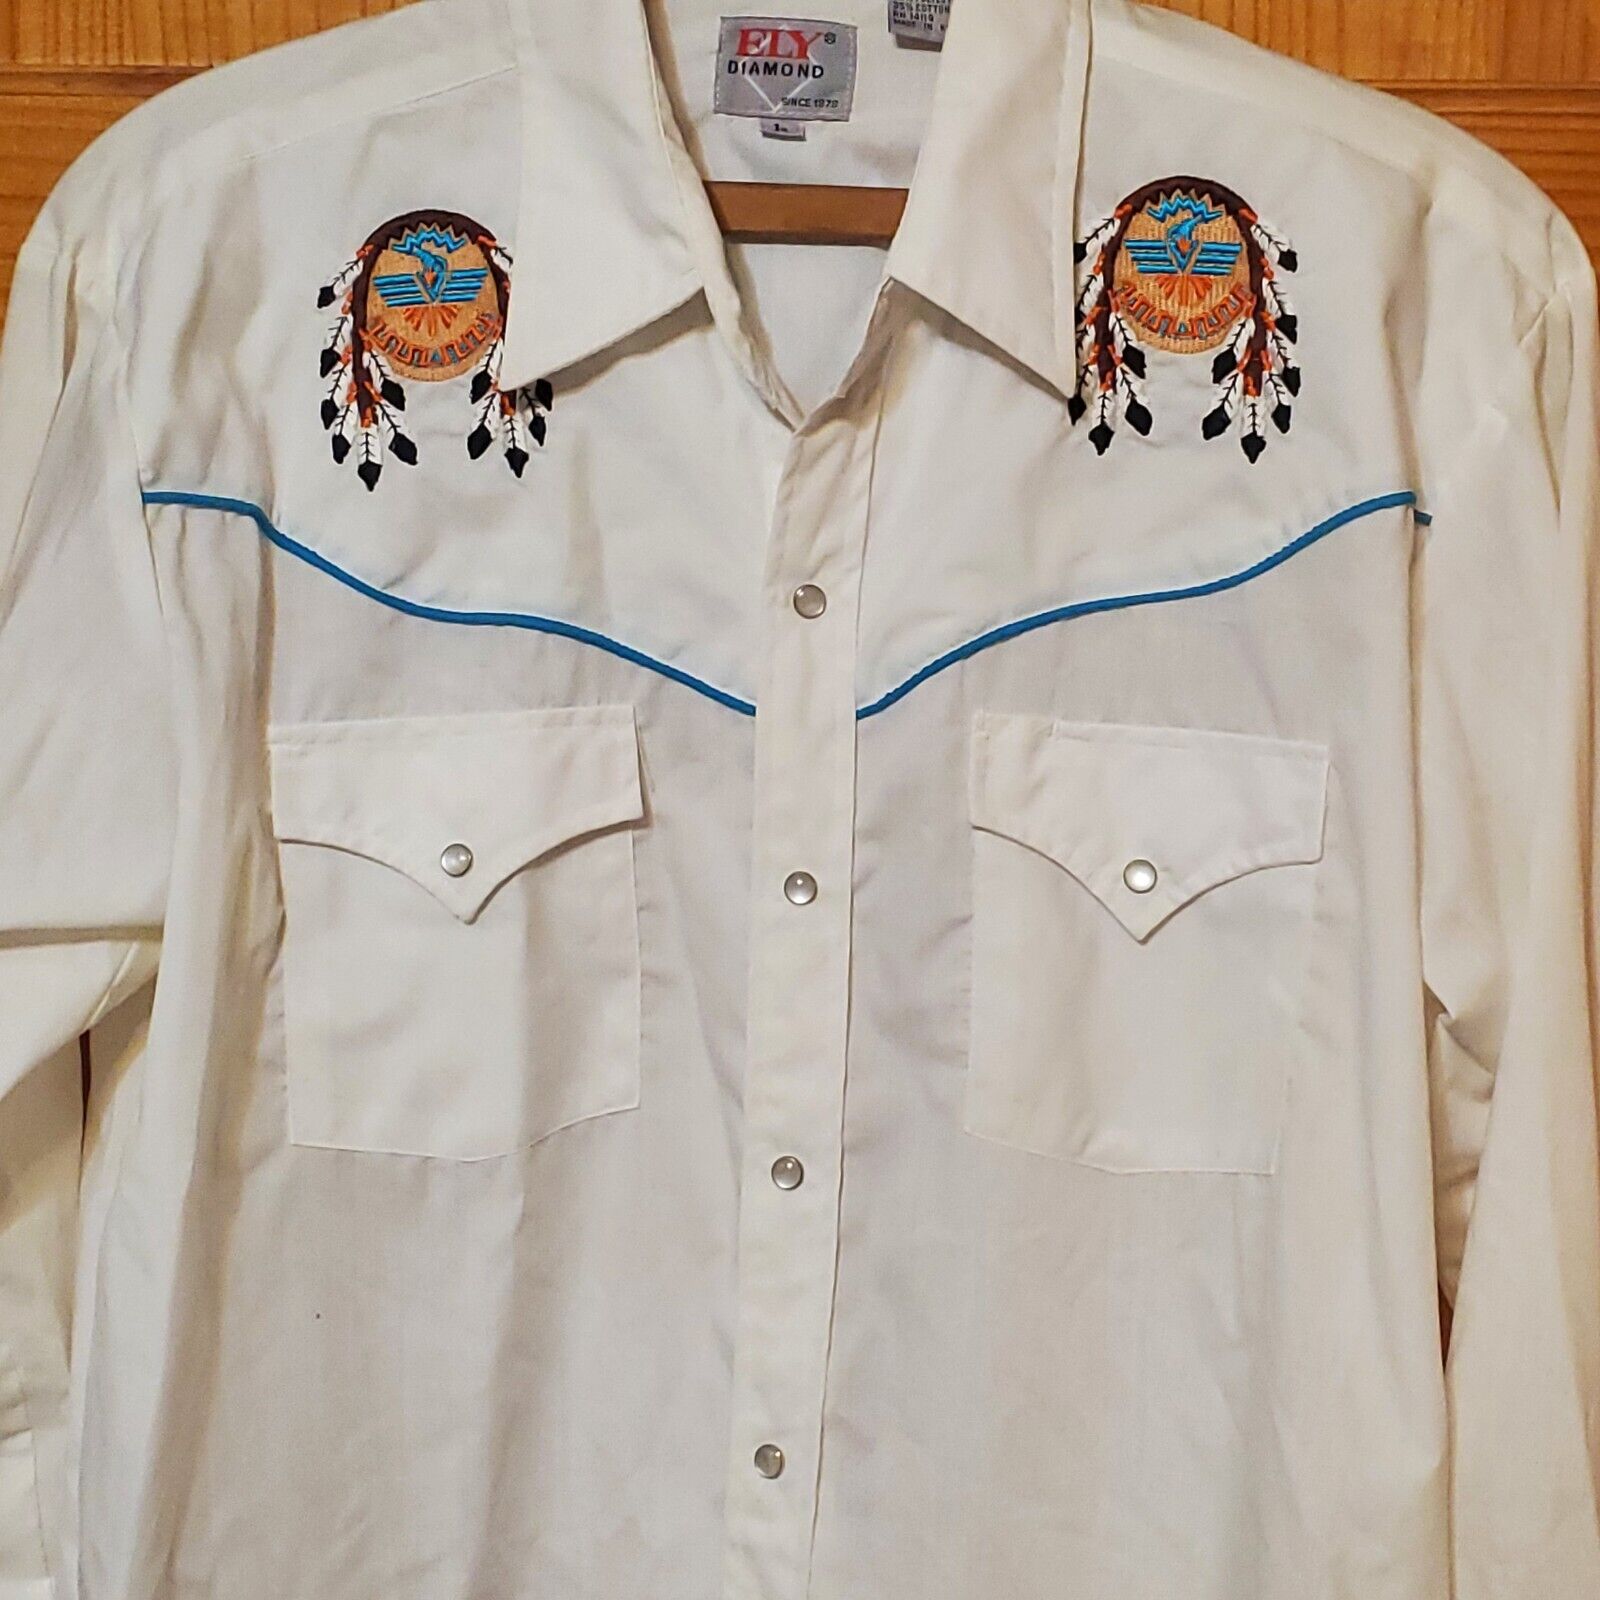 Vtg 70s Ely Diamond Men’s Large Snap Up Western Shirt Eagle Embroidery White